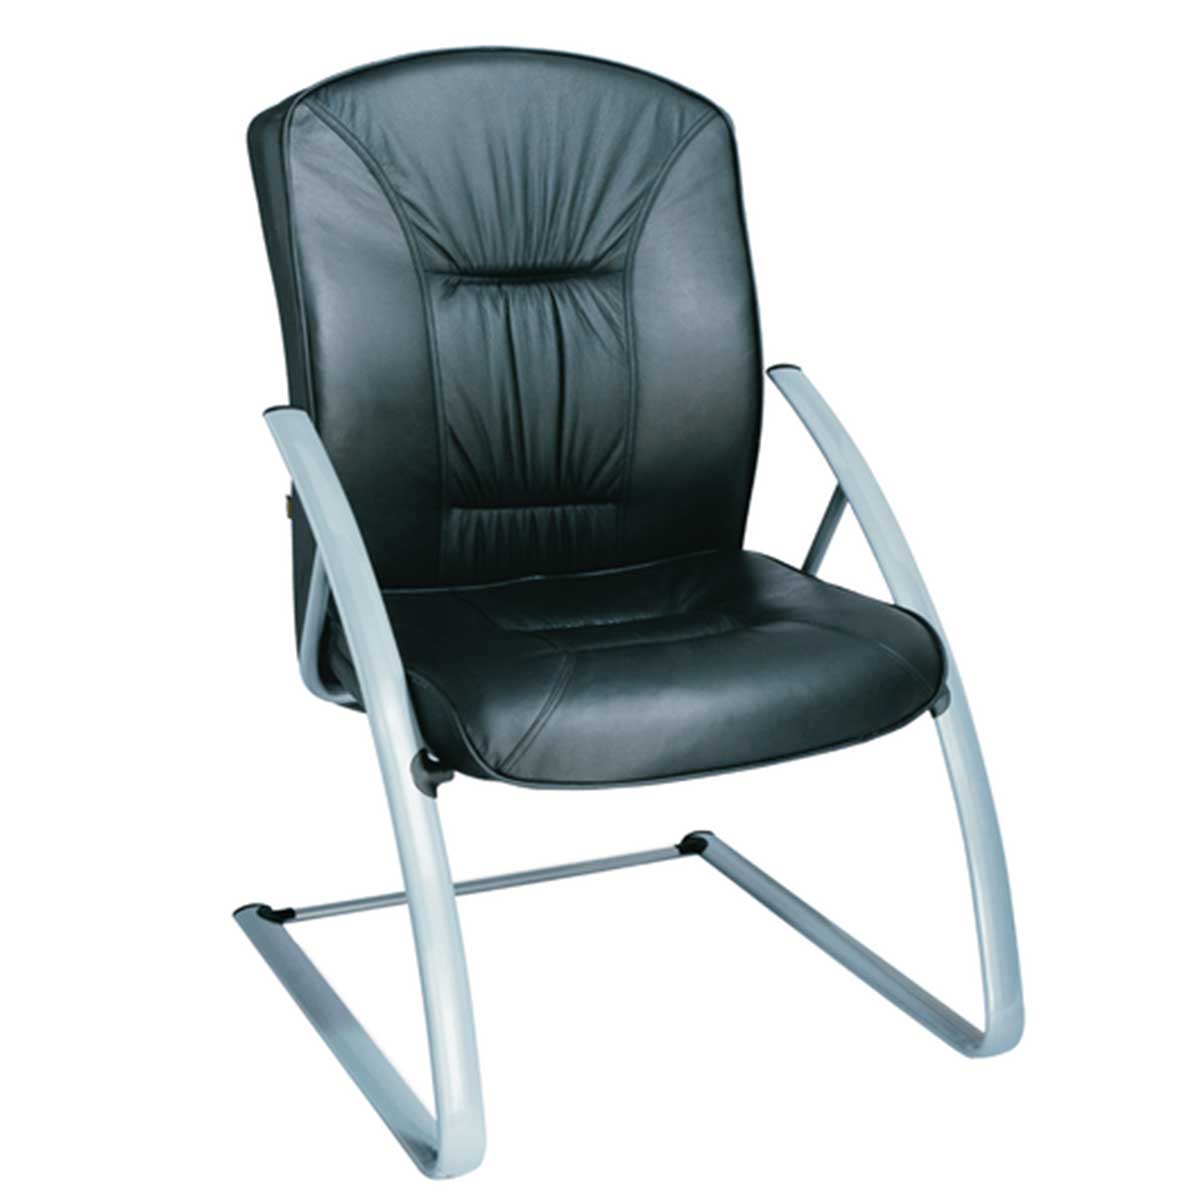 Leather office chair Manufacturers, Suppliers in Karkardooma